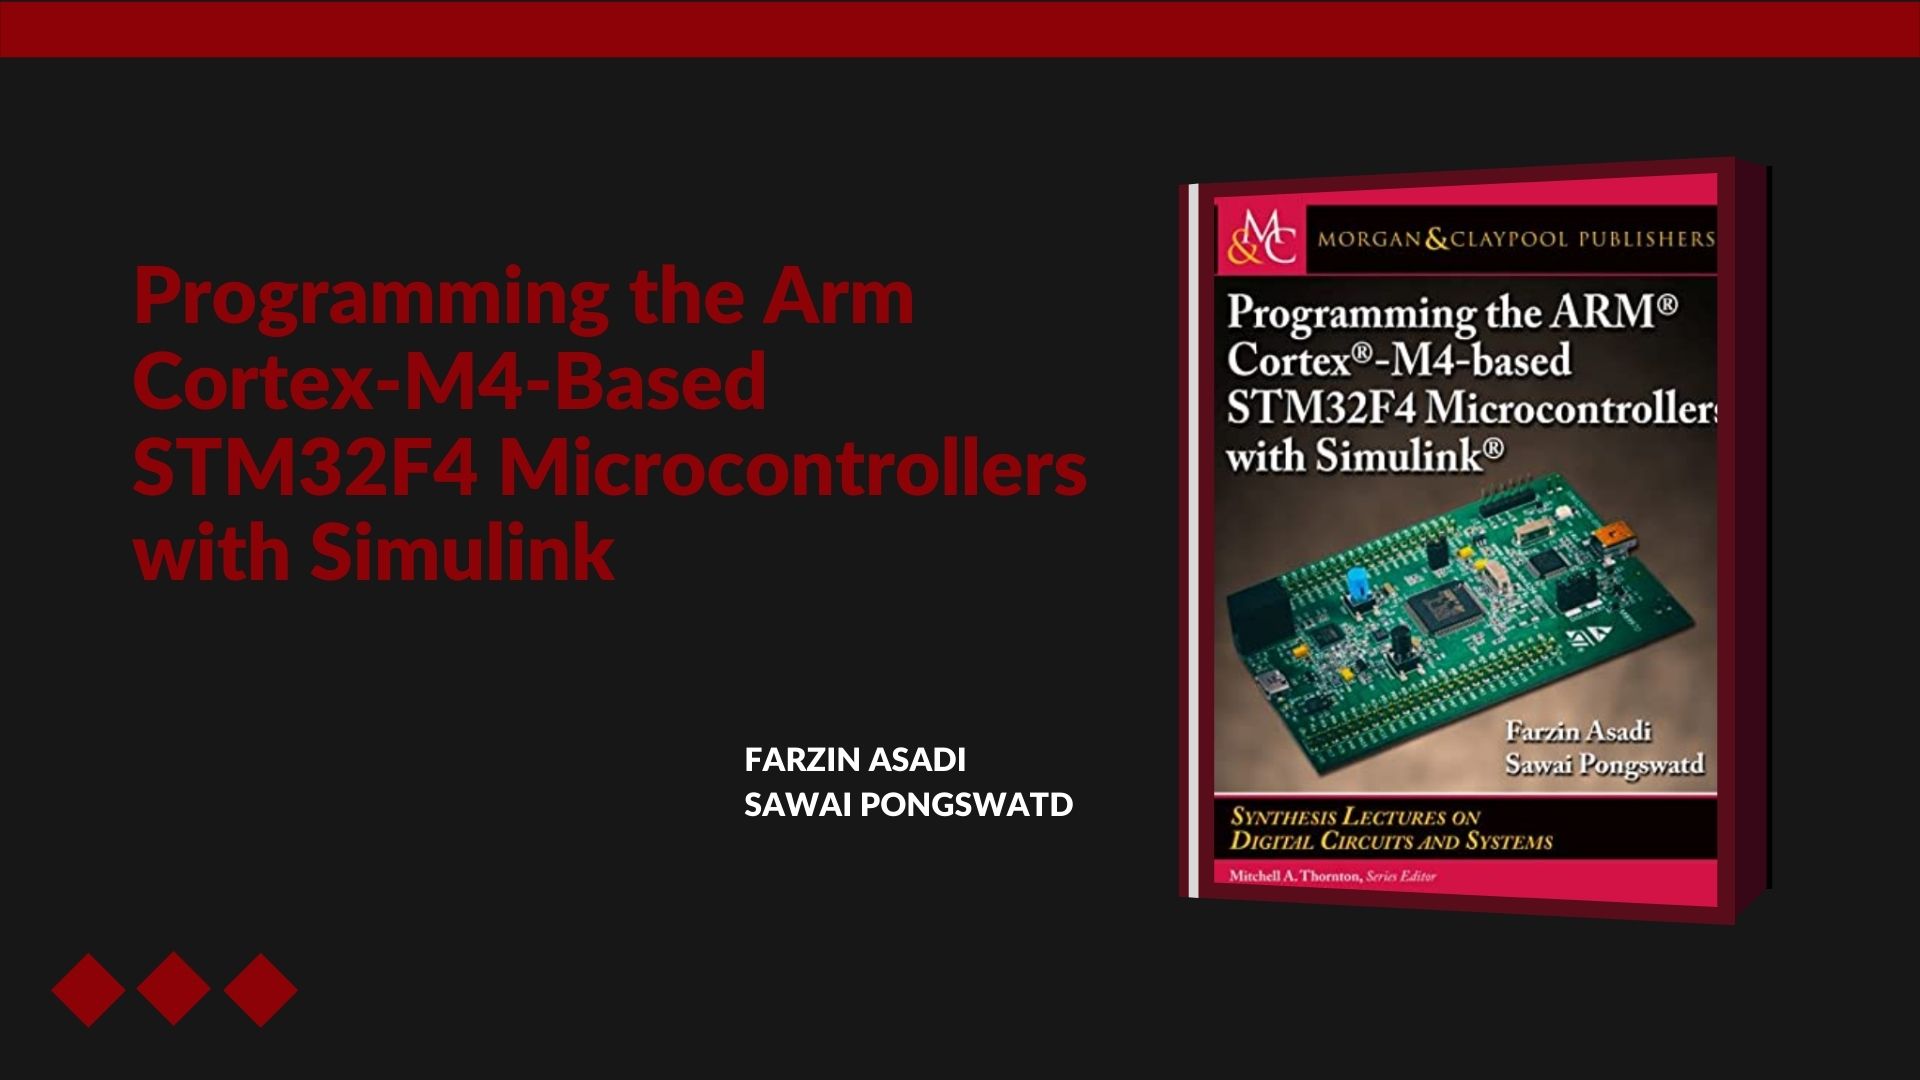 Programming the Arm Cortex-M4-Based STM32F4 Microcontrollers with Simulink